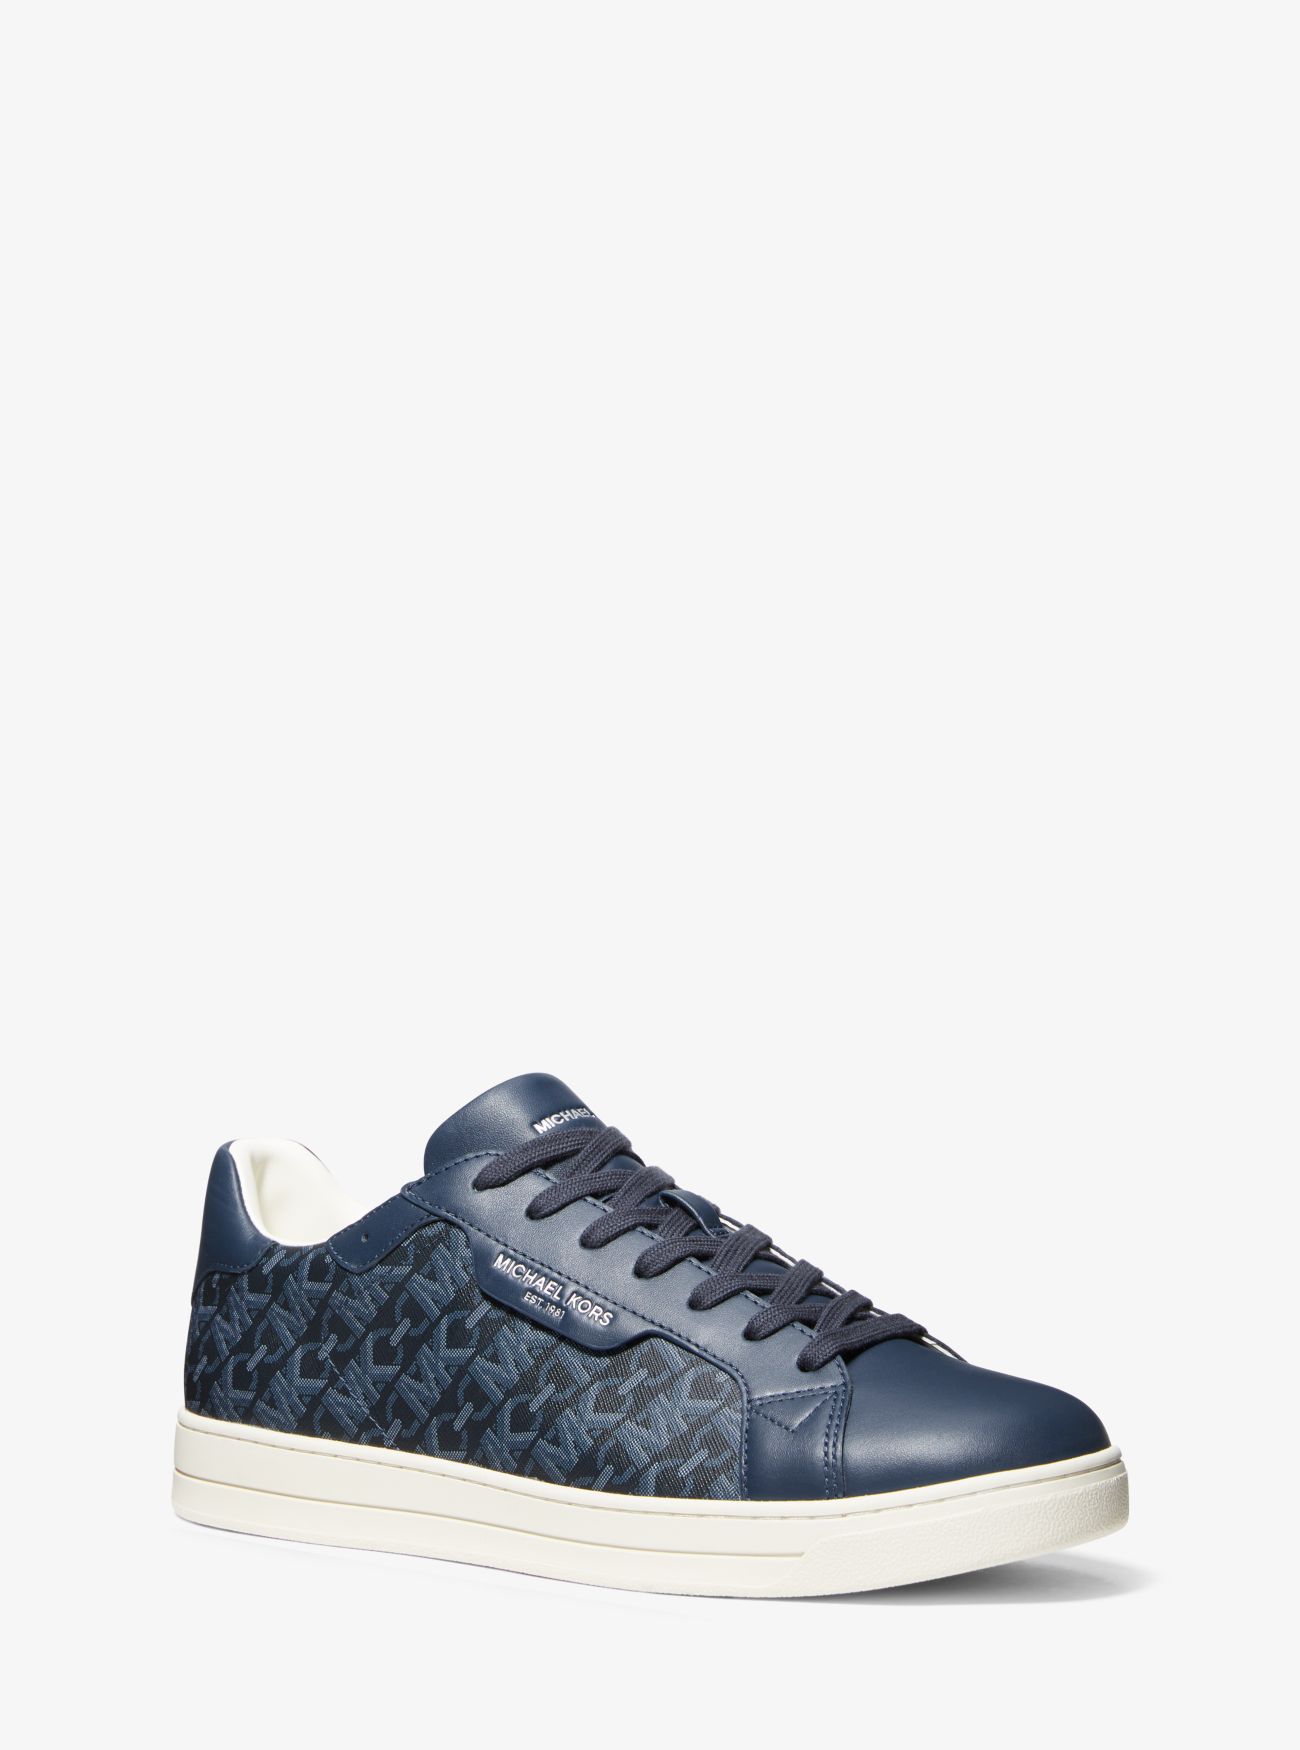 MK Keating Empire Signature Logo and Leather Trainers - Navy - Michael Kors